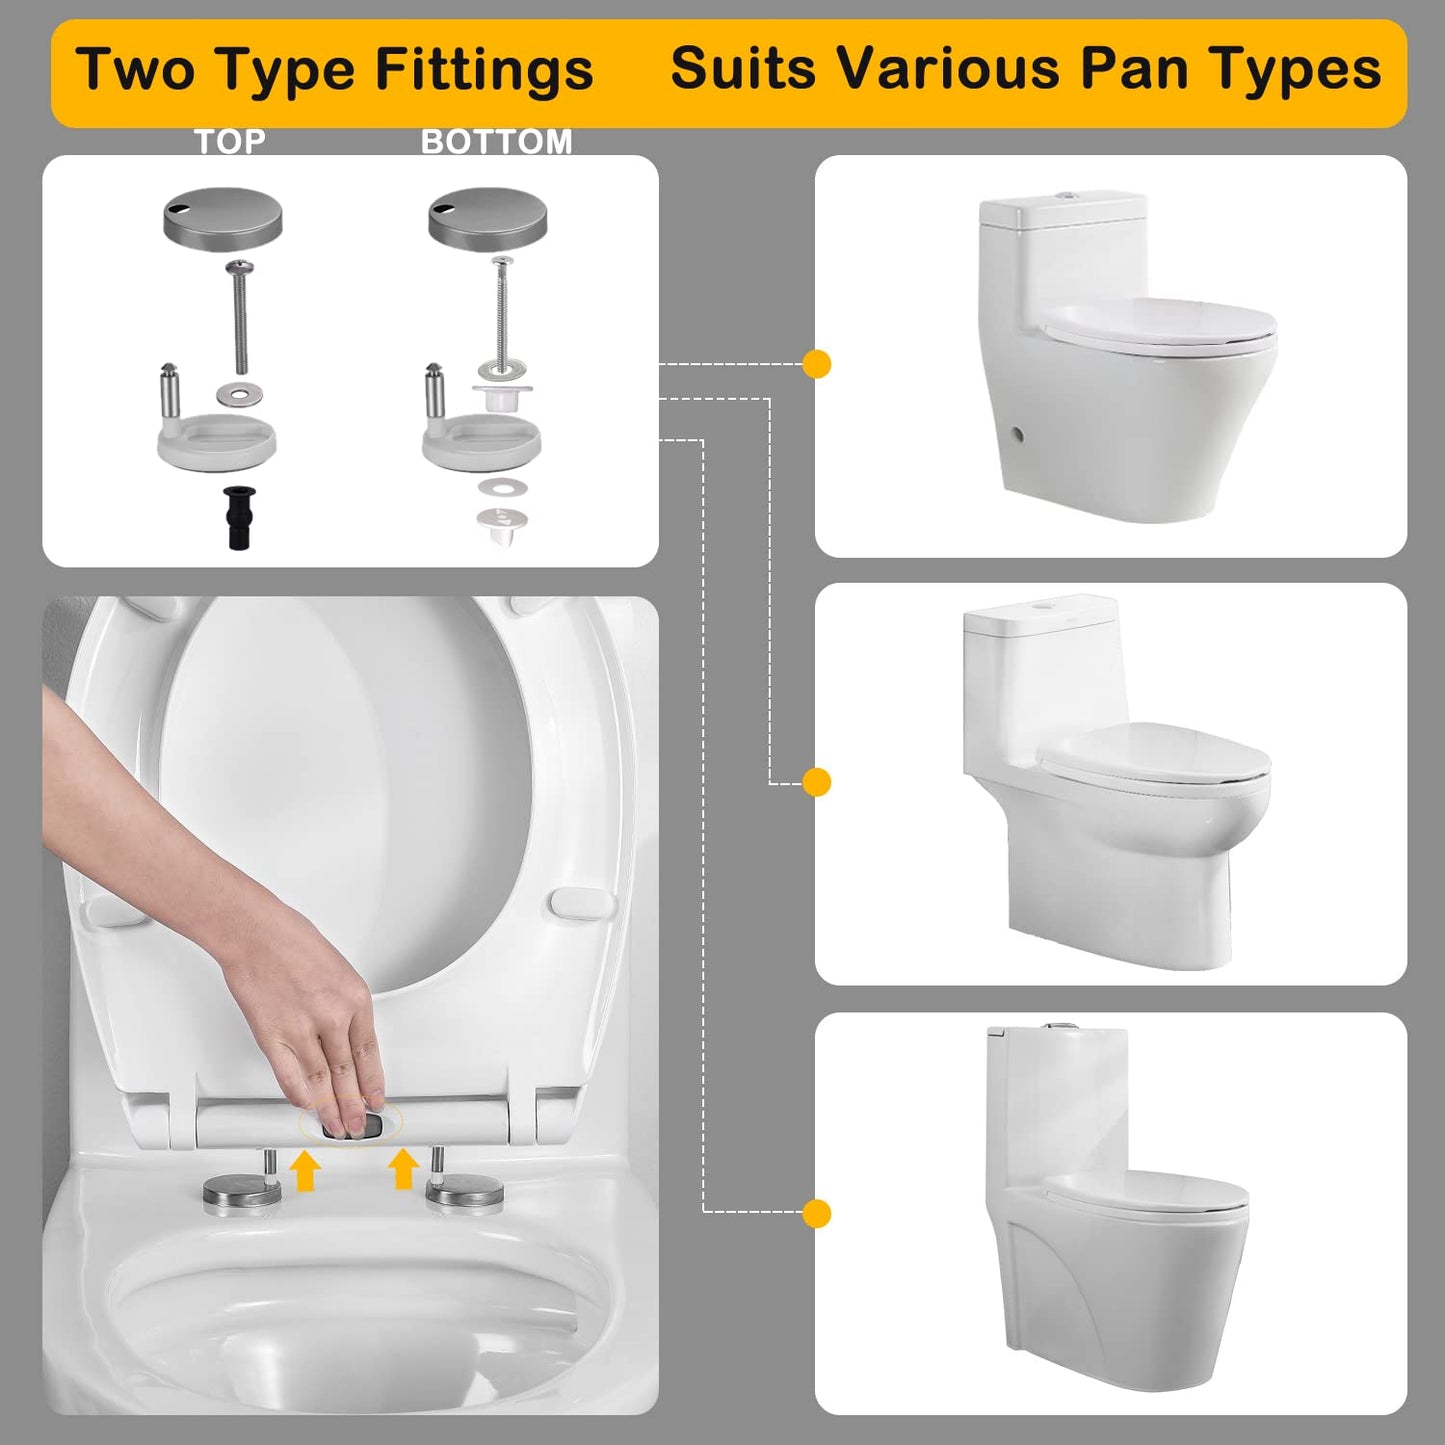 Oval Shape Toilet Seat Soft Close - Easy Top Fixing With Adjustable Hinges